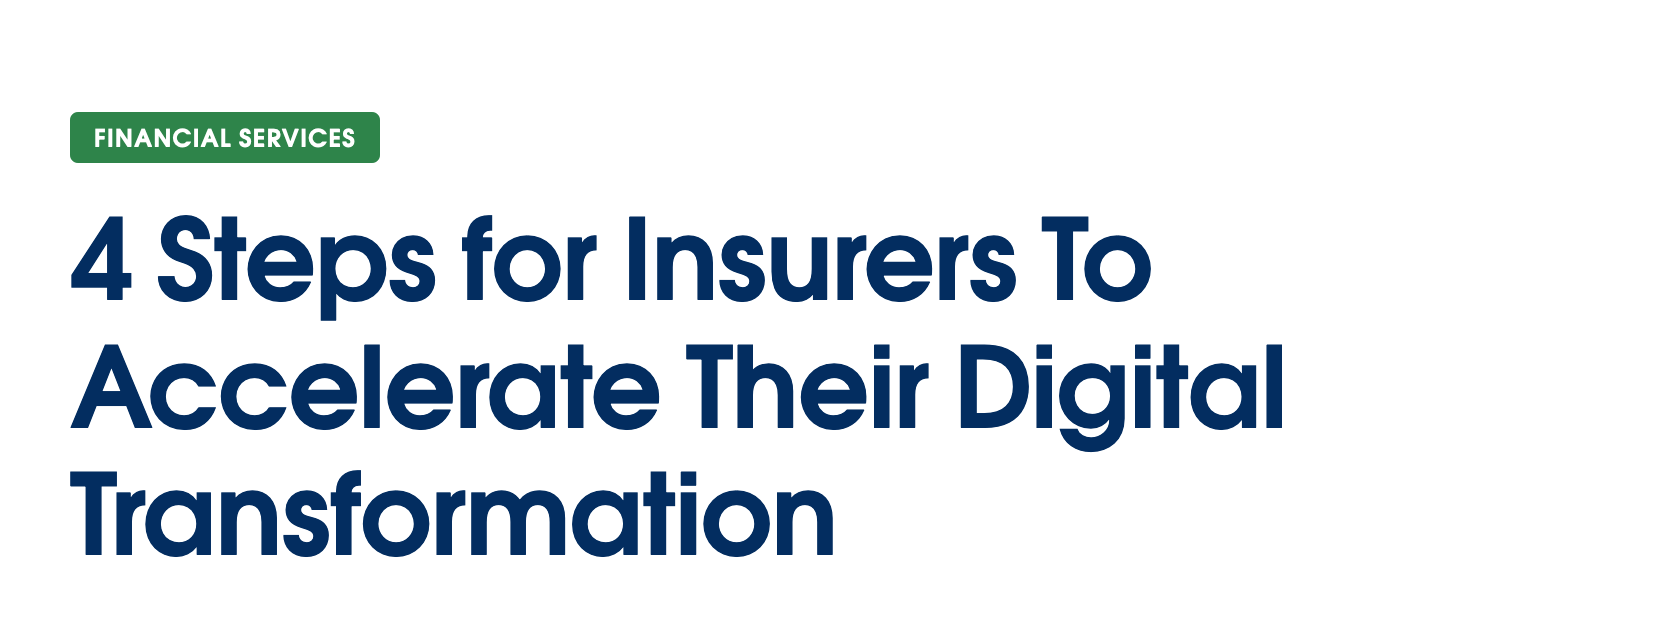 4 Steps for Insurers To Accelerate Their Digital Transformation